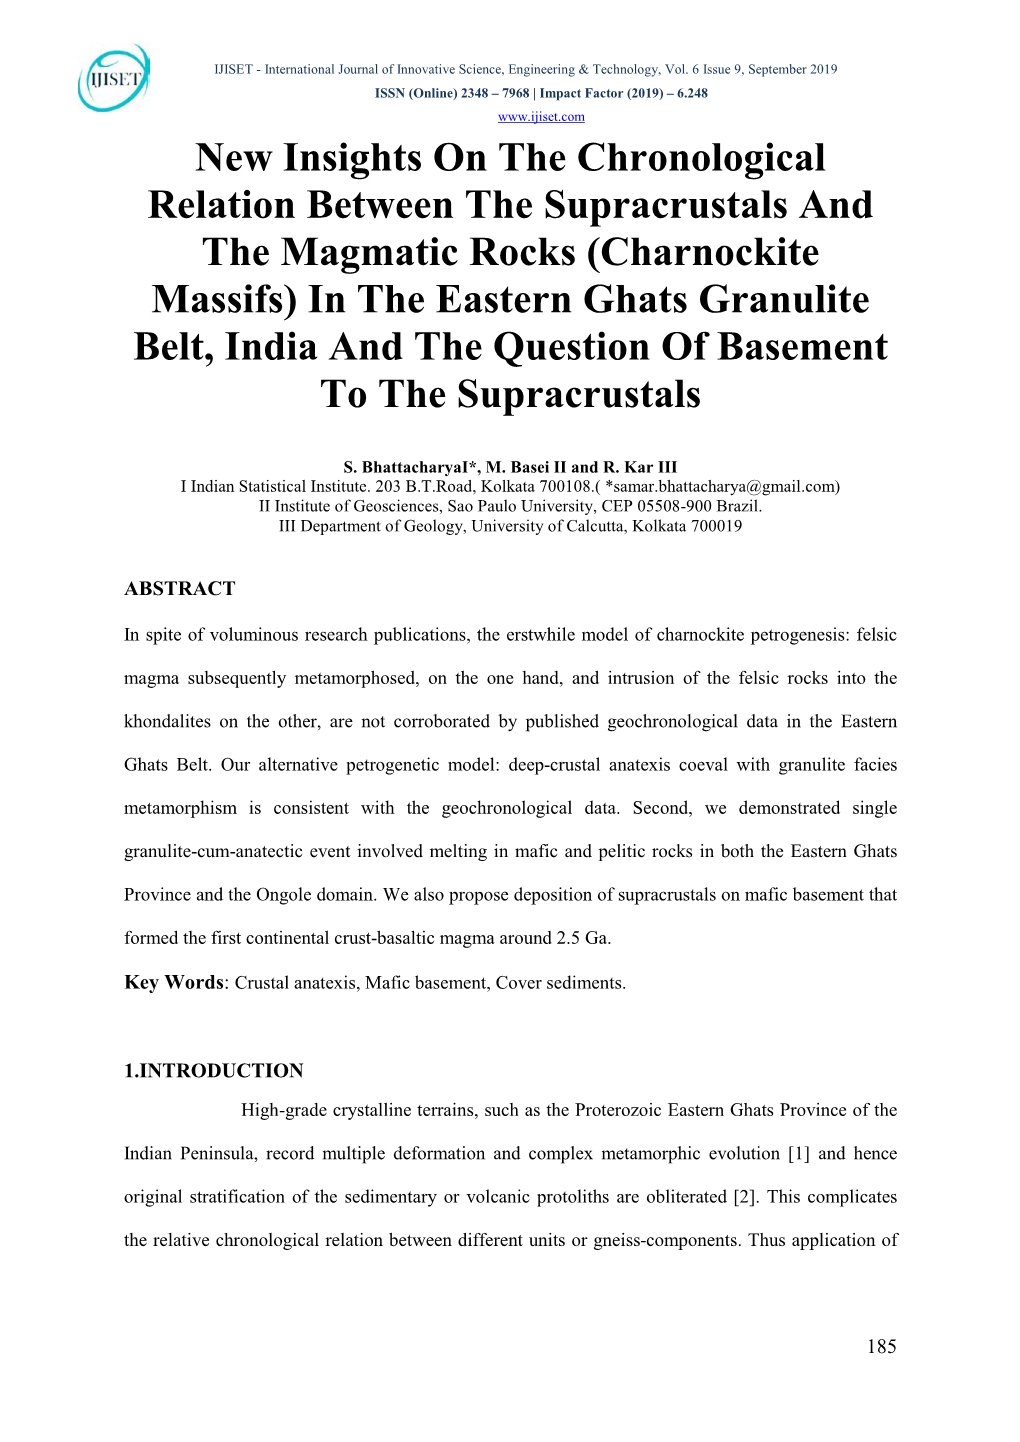 Charnockite Massifs) in the Eastern Ghats Granulite Belt, India and the Question of Basement to the Supracrustals